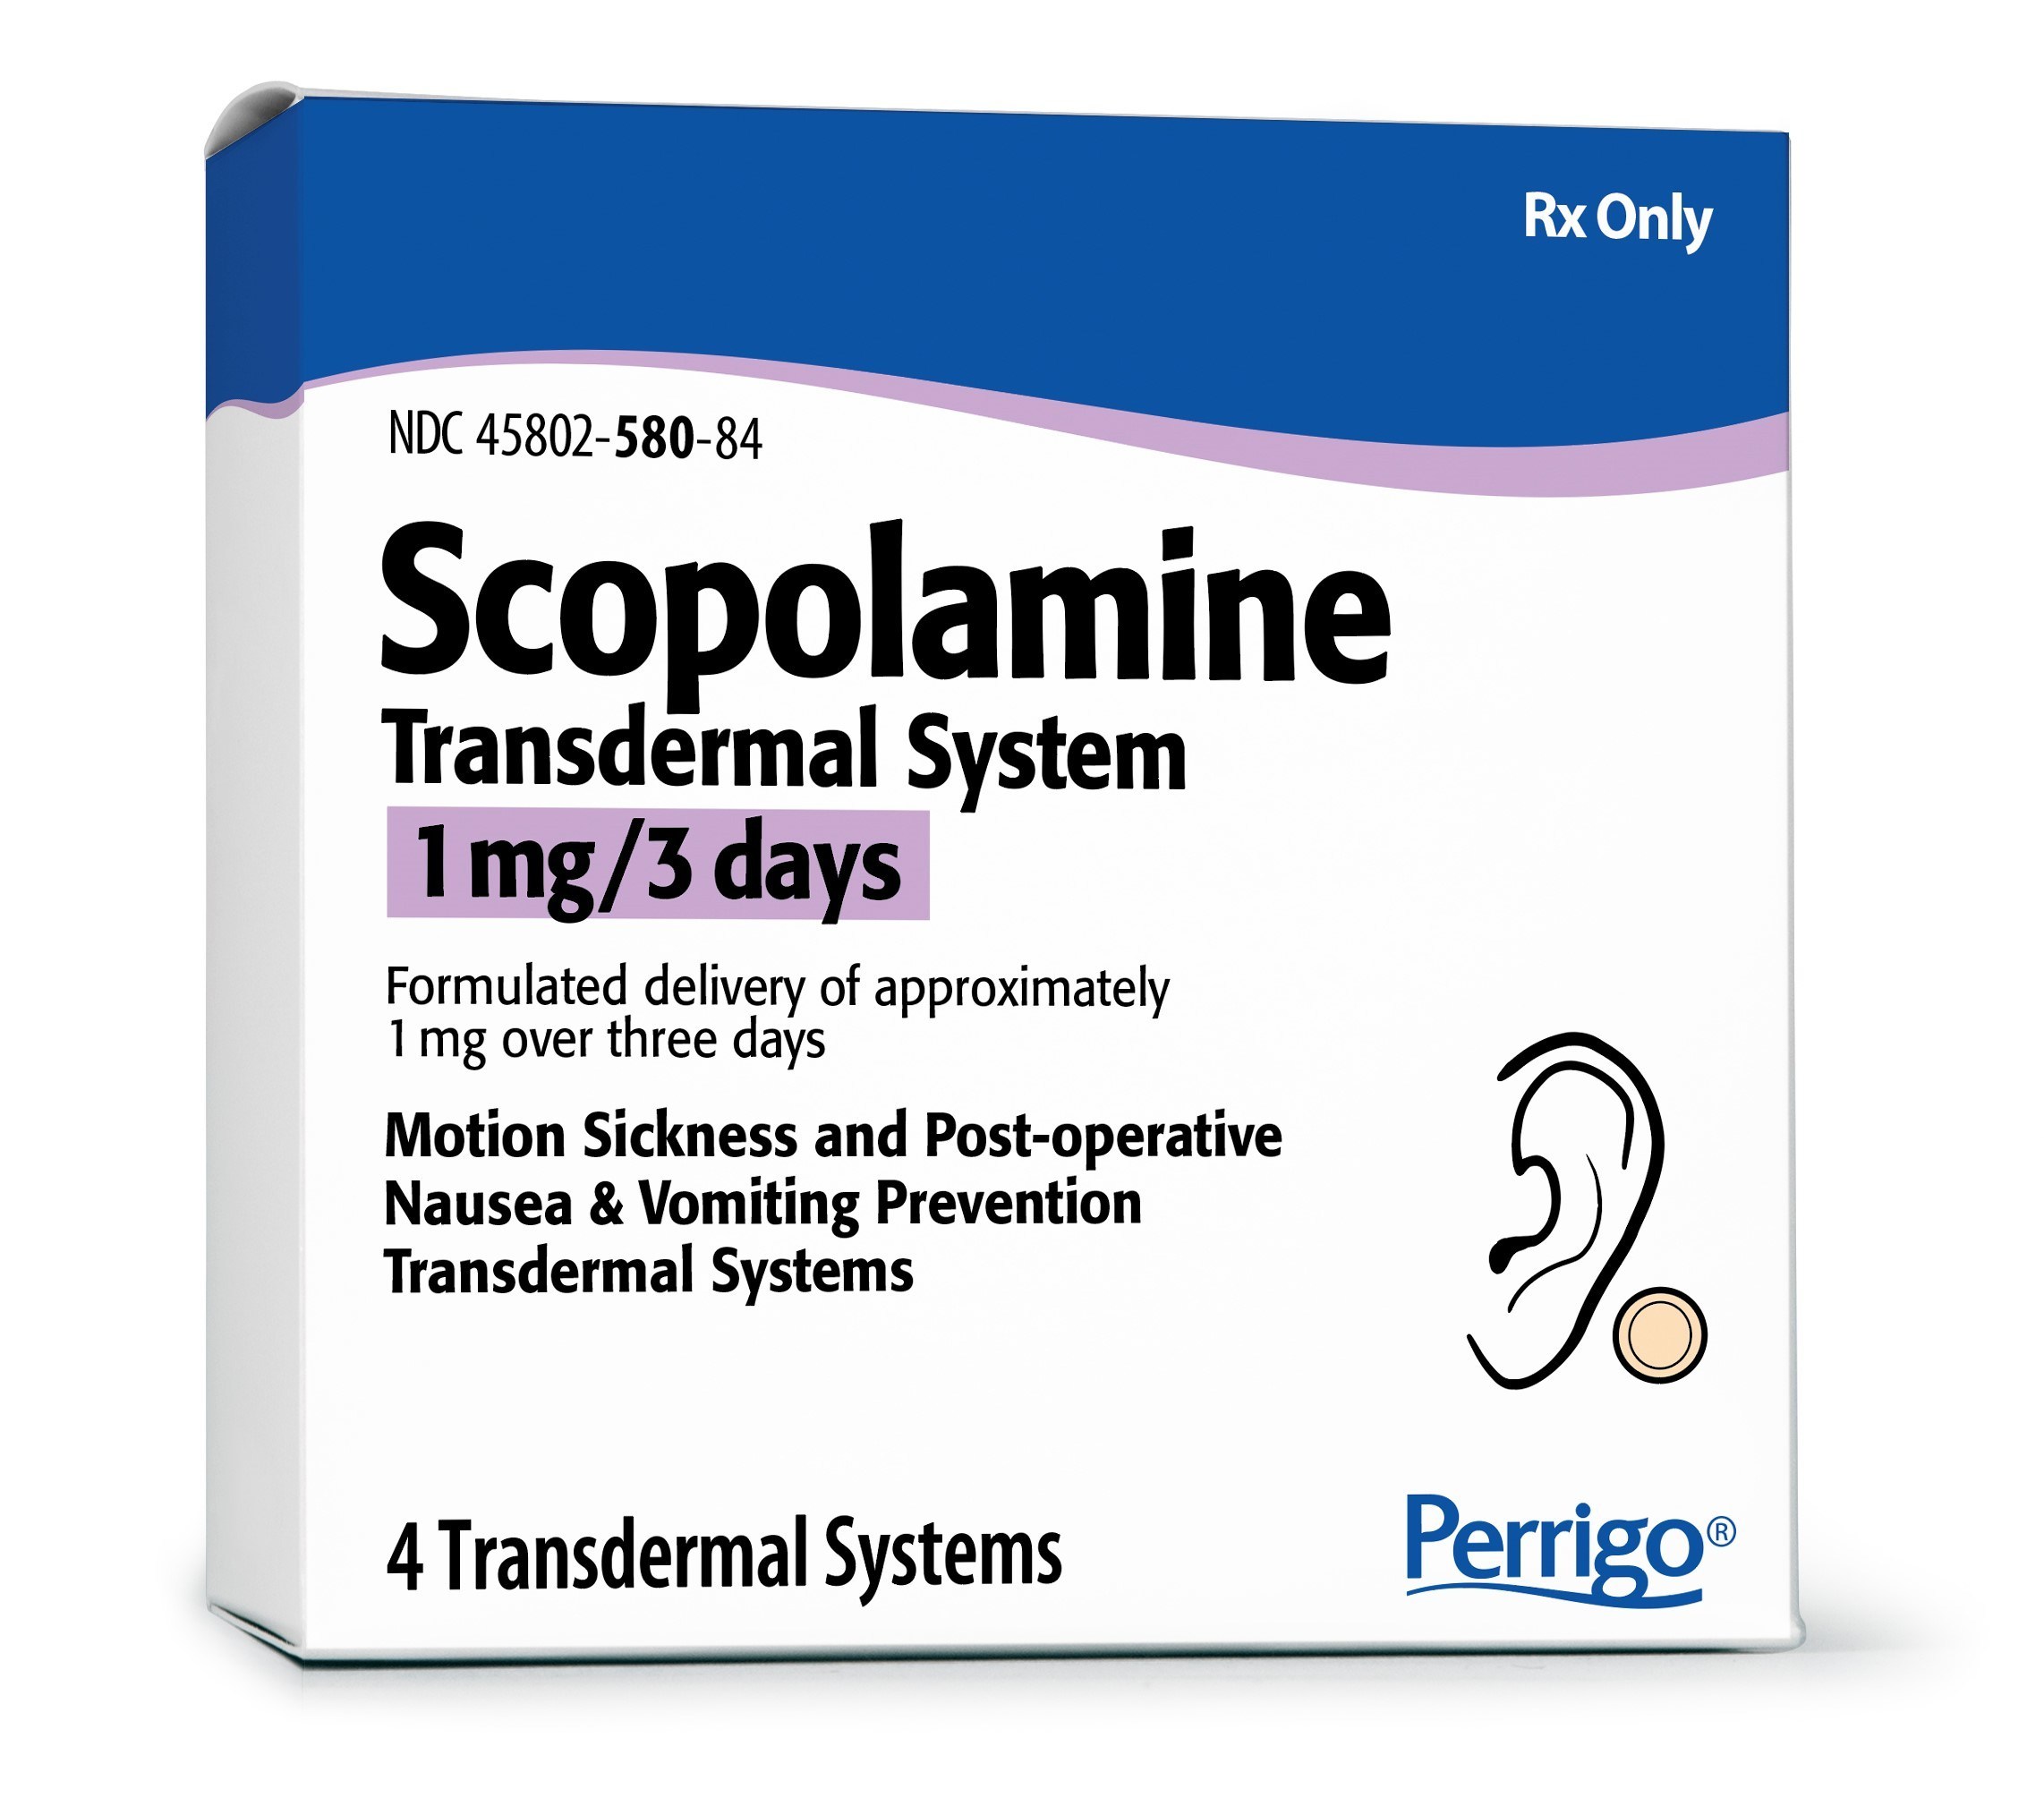 Perrigo Announces the Relaunch of the AB Rated Generic Version of Transderm Scop® 1.5 MG - Oct 3, 2019